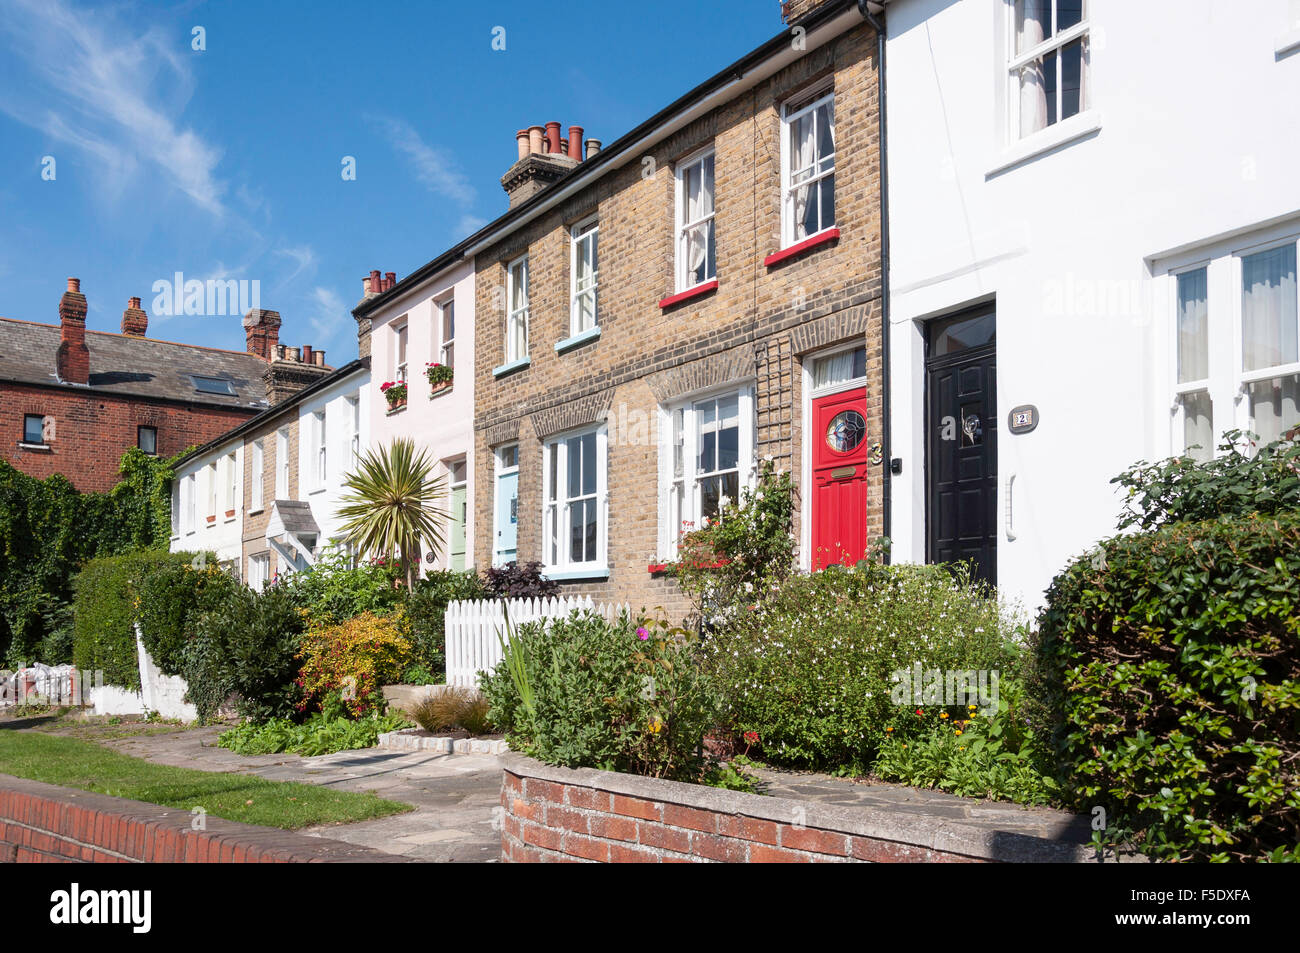 Période cottages, Leigh Hill, Leigh-on-Sea, Essex, Angleterre, Royaume-Uni Banque D'Images